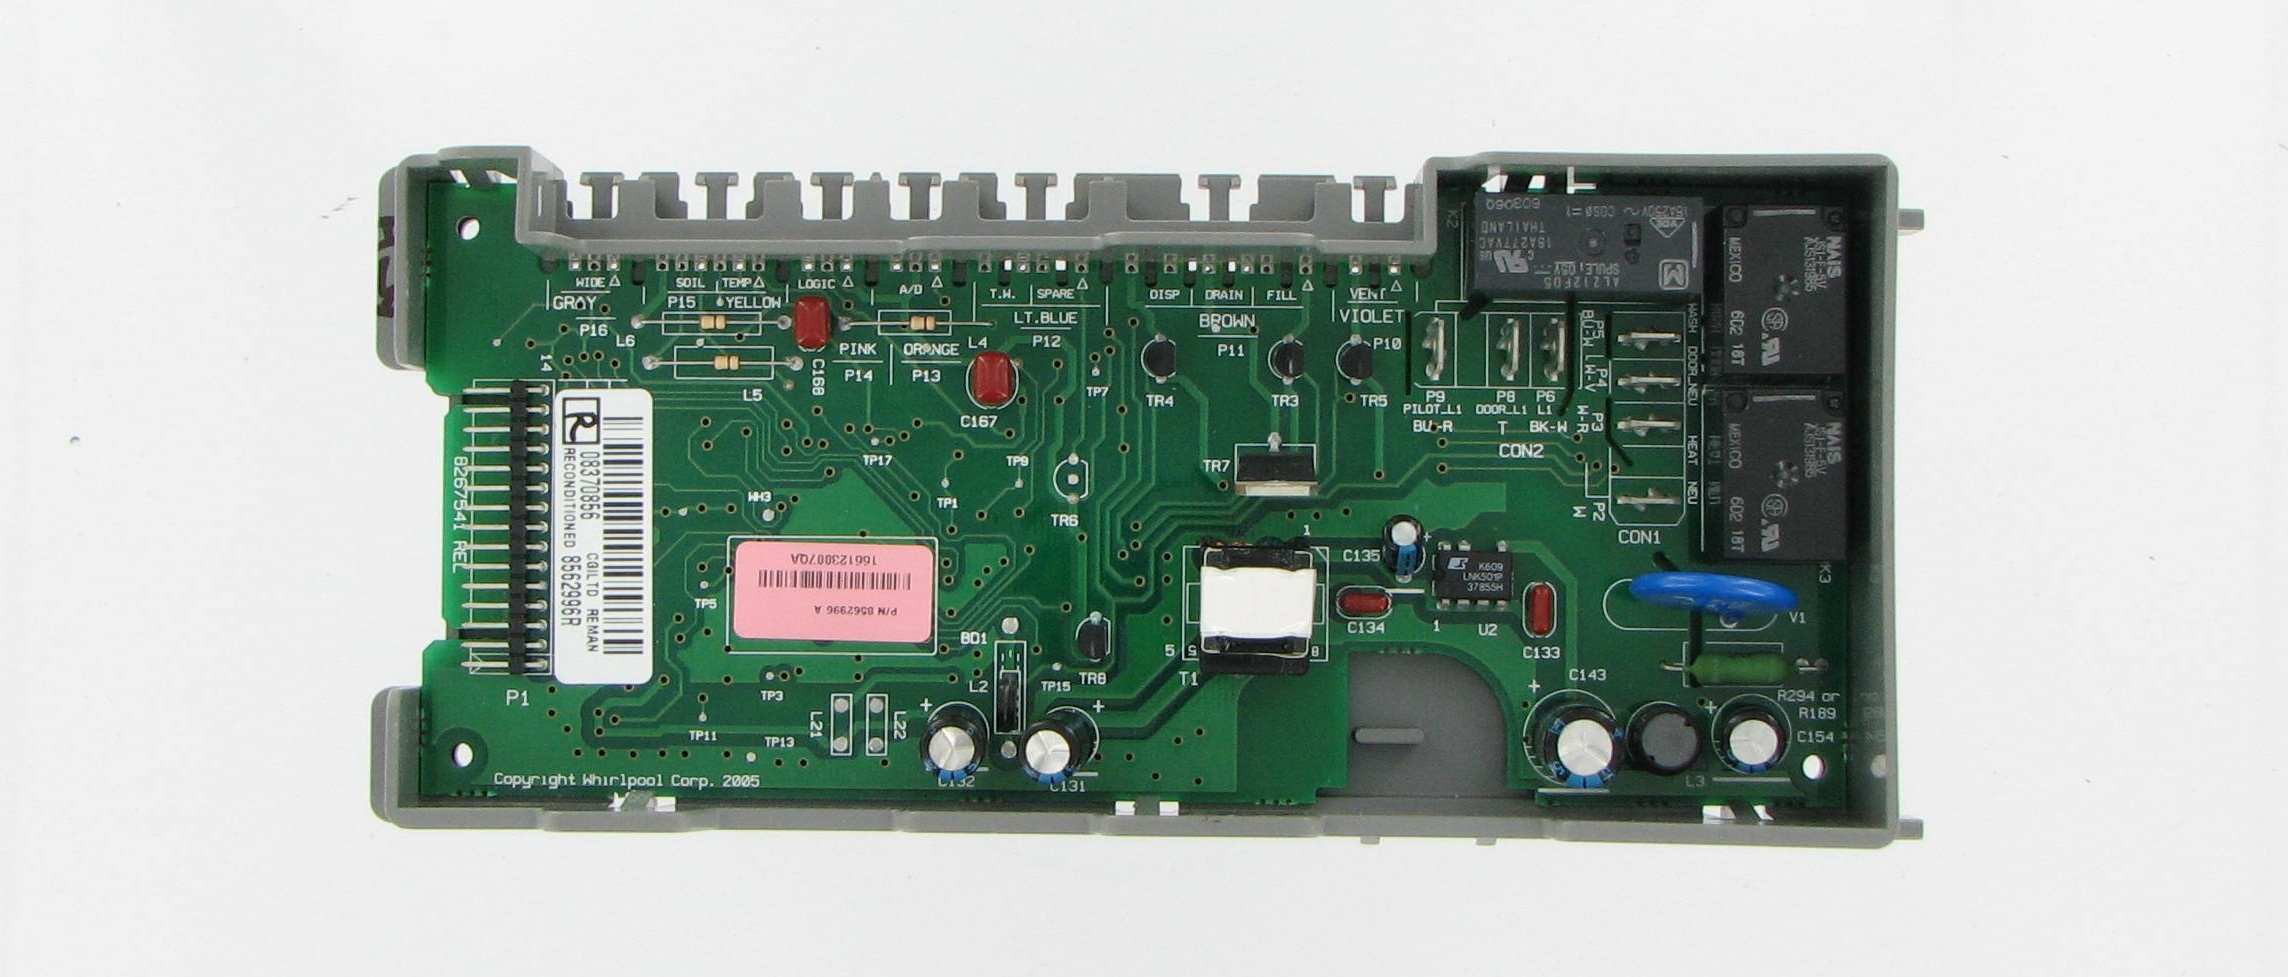 Whirlpool W10285178 Dishwasher LogicPower Board Control Repair Service for sale online 